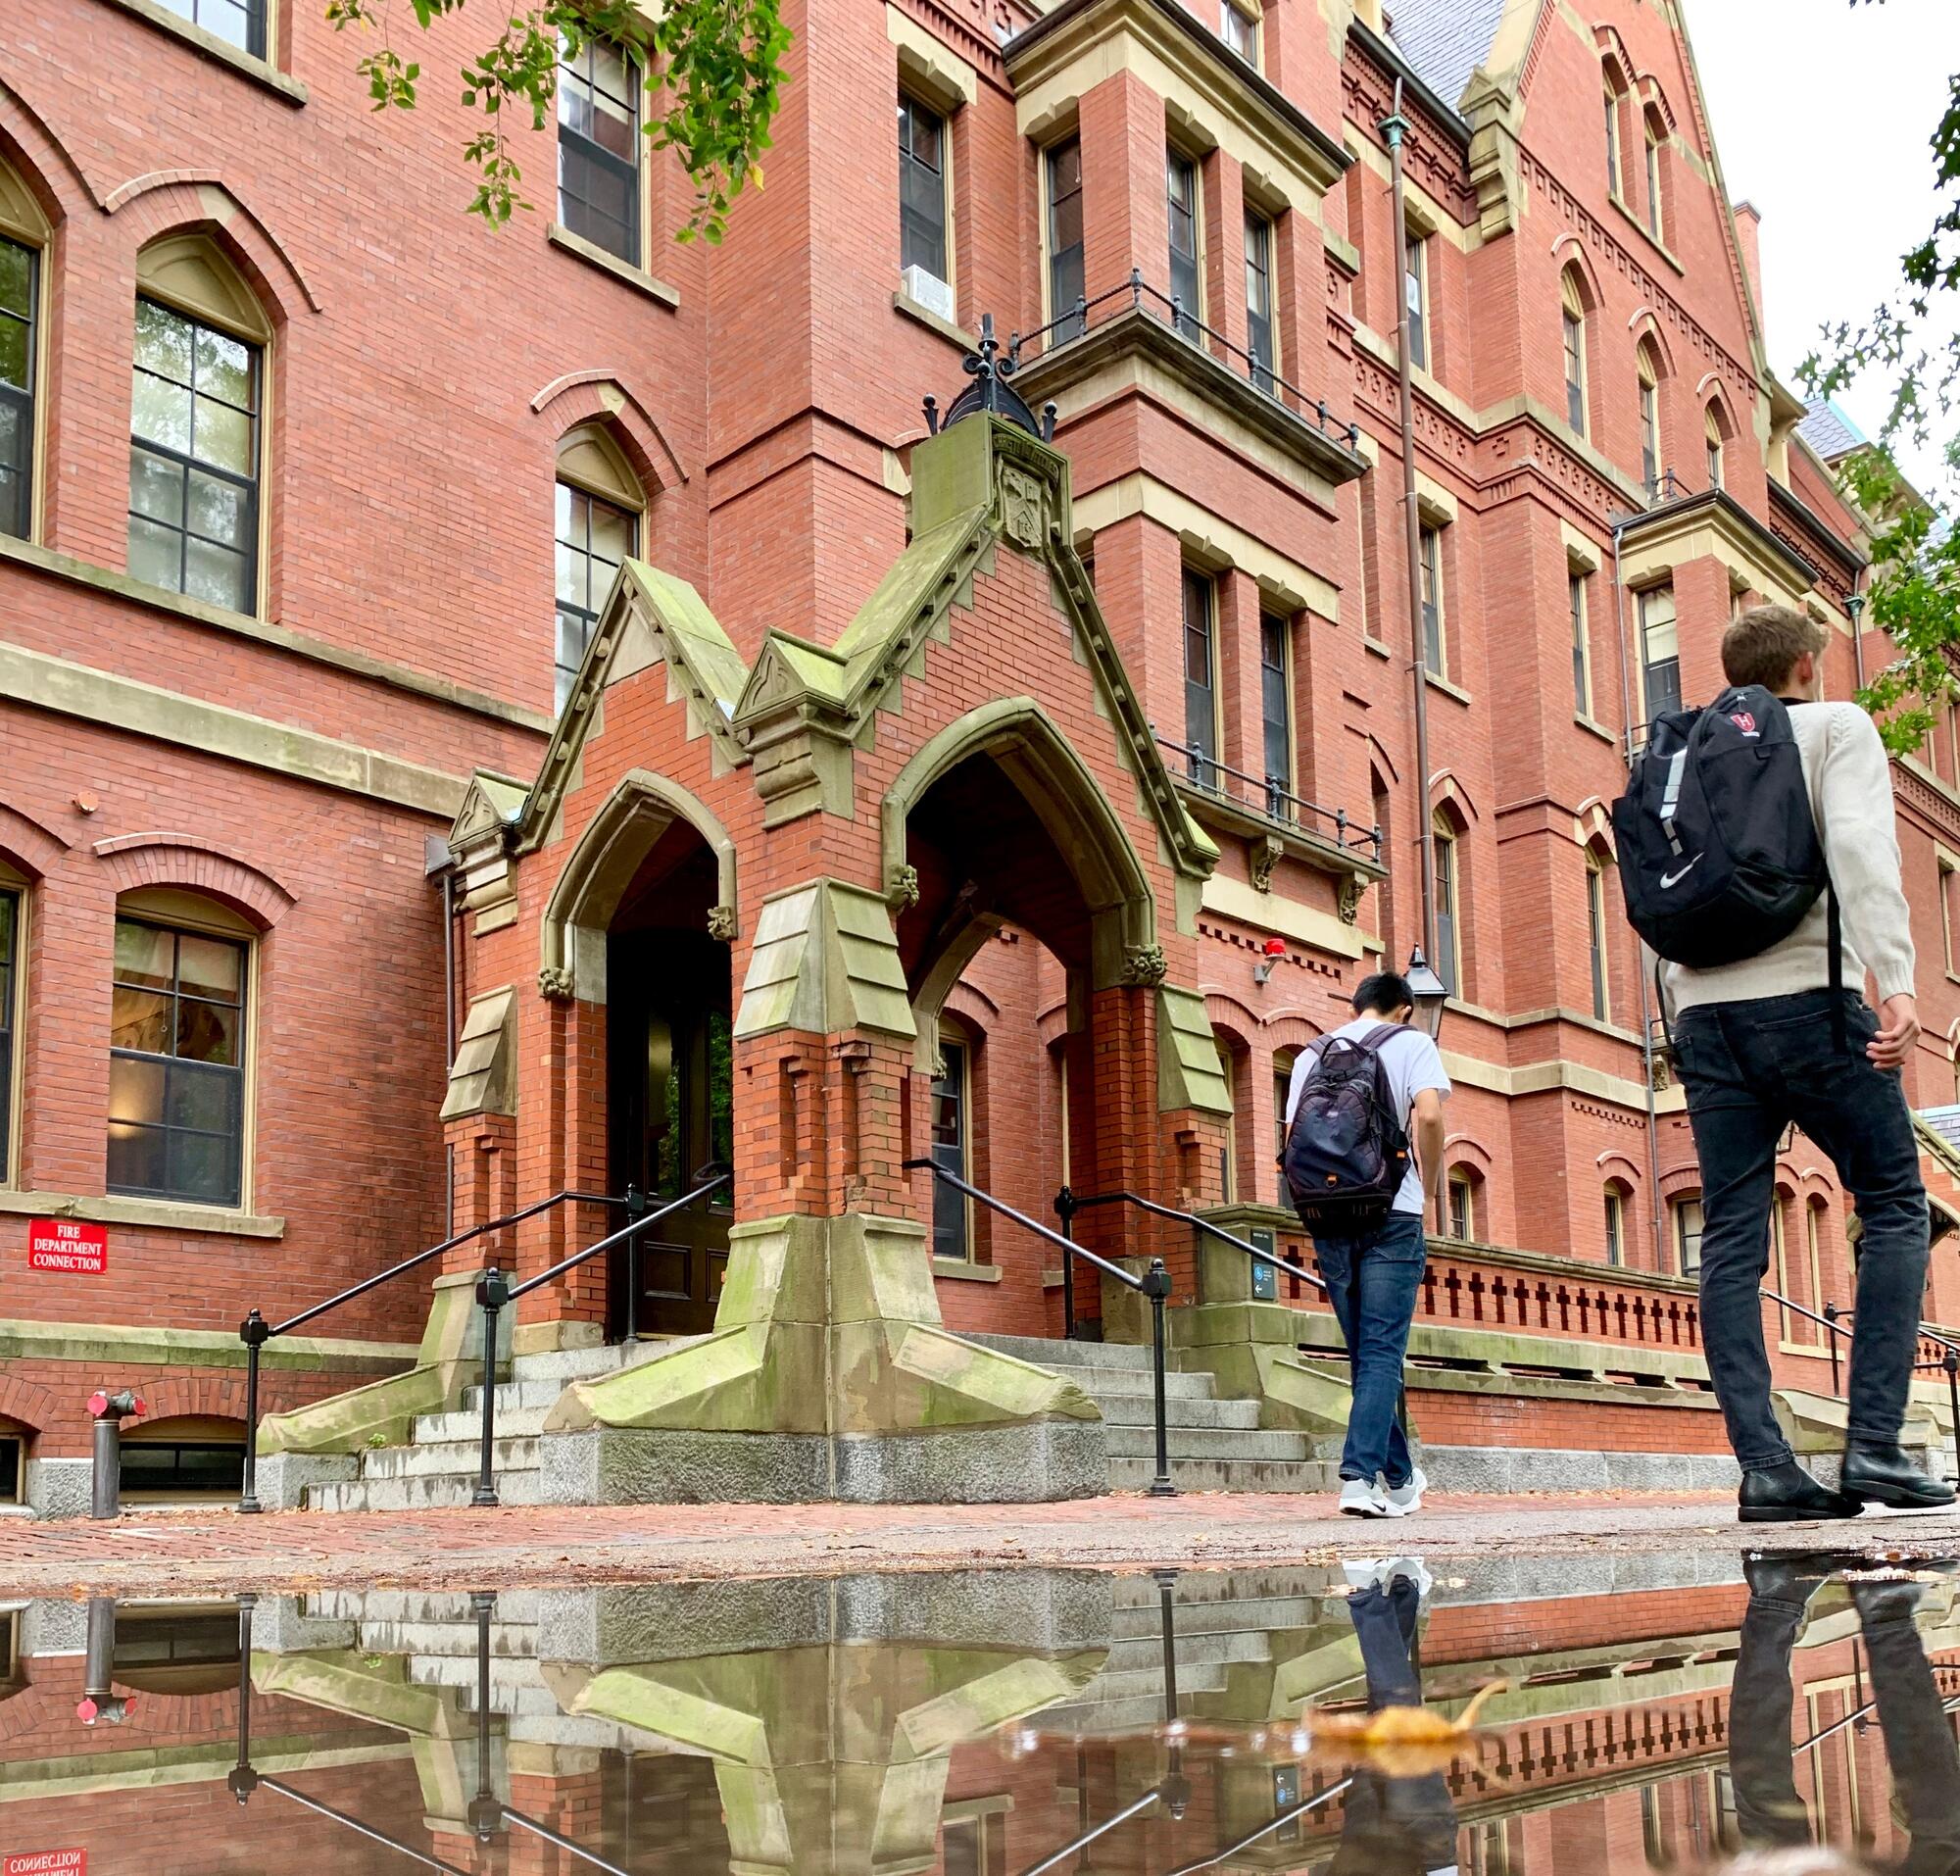 Students walking through Harvard Yard with their reflection showing in a puddle.